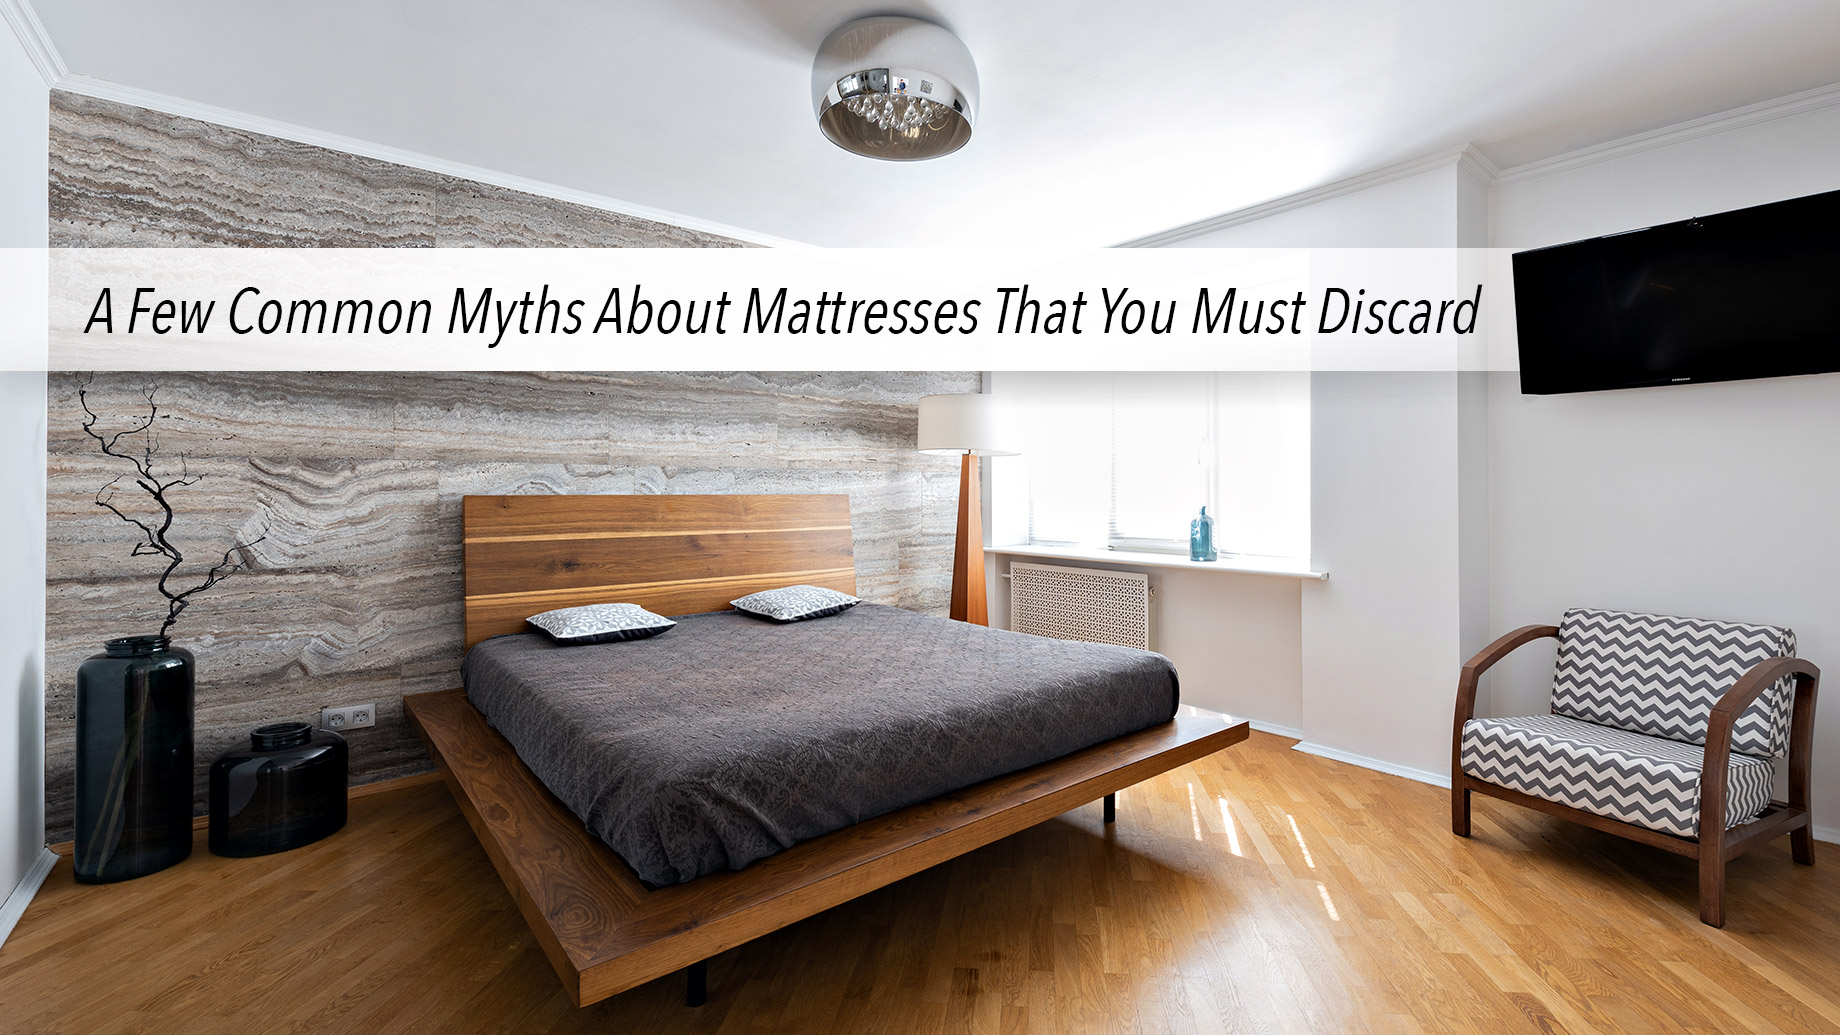 A Few Common Myths About Mattresses That You Must Discard